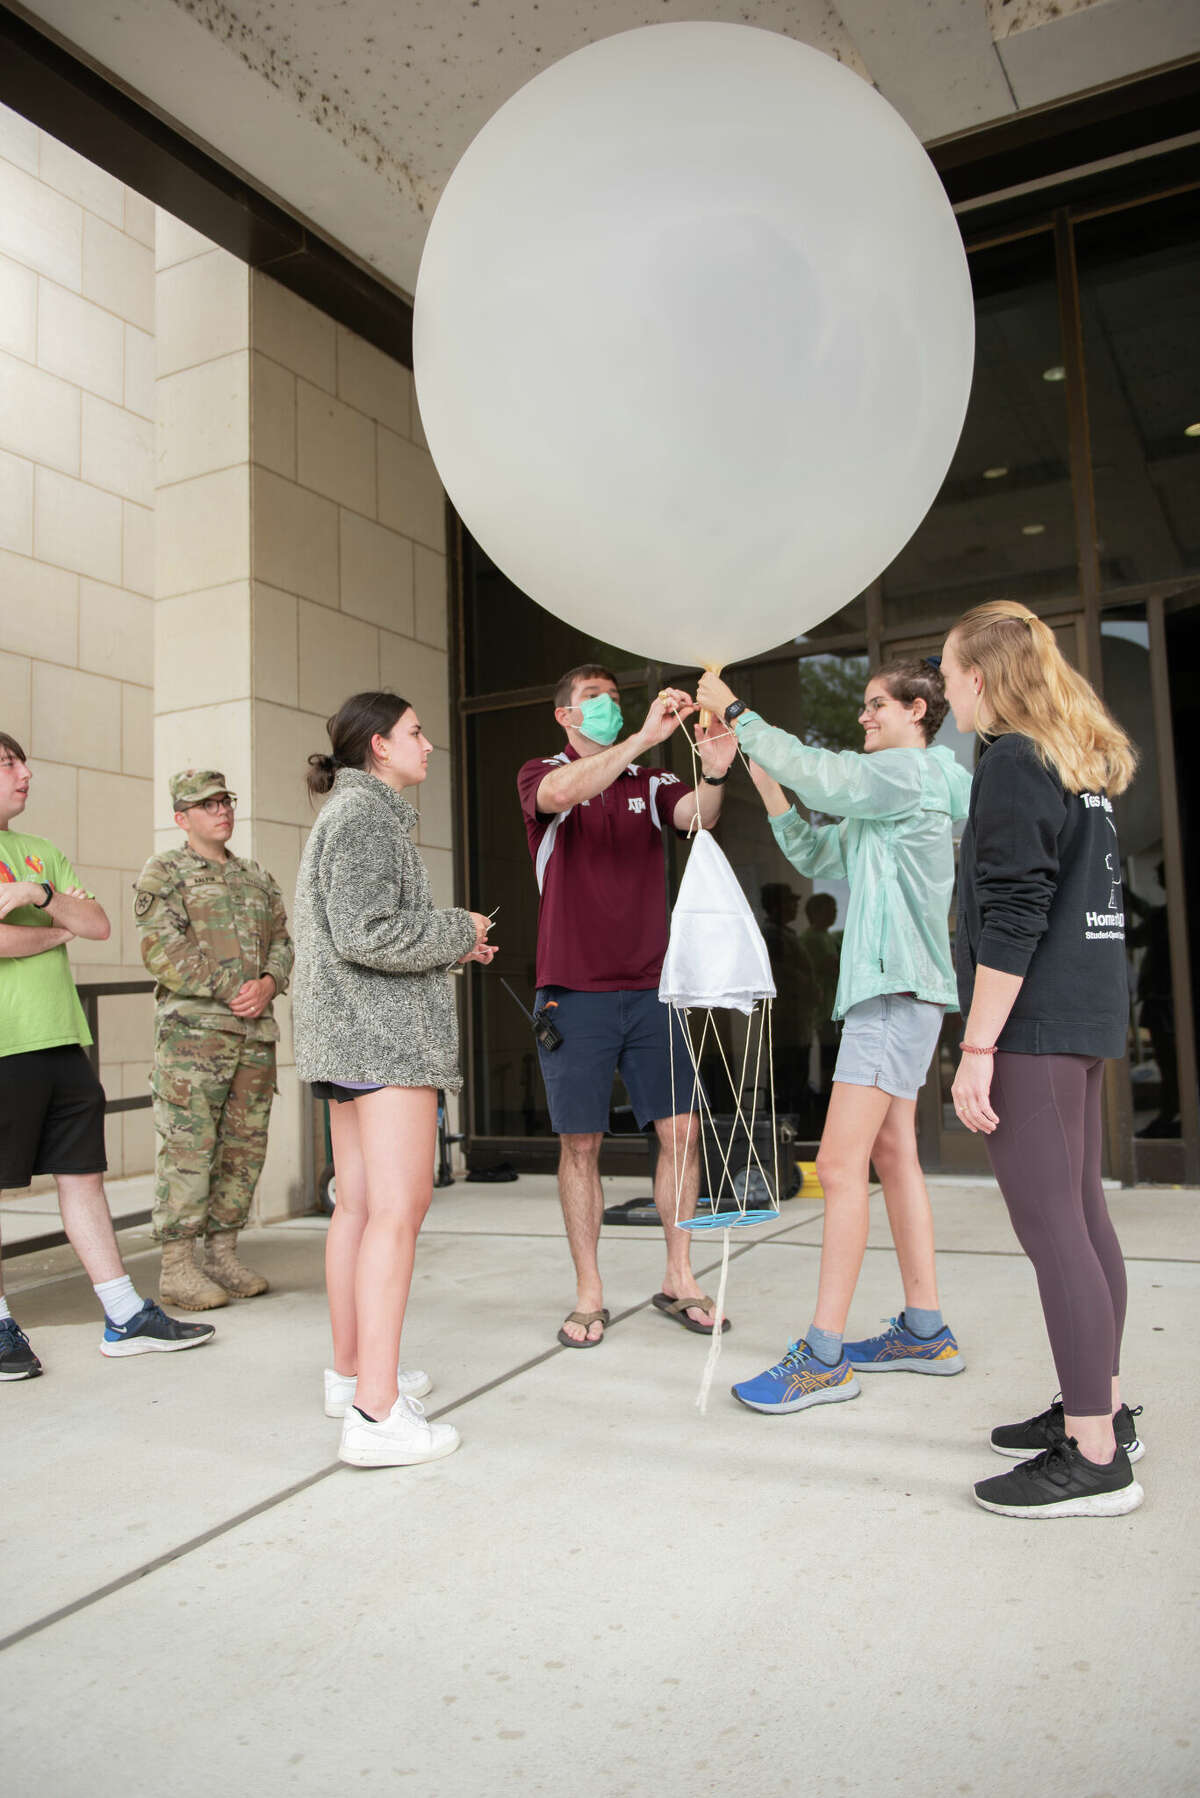 Brian Neuville, Jonathan Halpin, Clara Holloway, Dr. Erik Nielsen, Sierra Hill, and Madelyn Hess attach the radiosonde parachute to a weather balloon while preparing for a balloon launch on Oct. 24, 2022 as a part of the Texas A&M Student Operational Upper-Air Program.